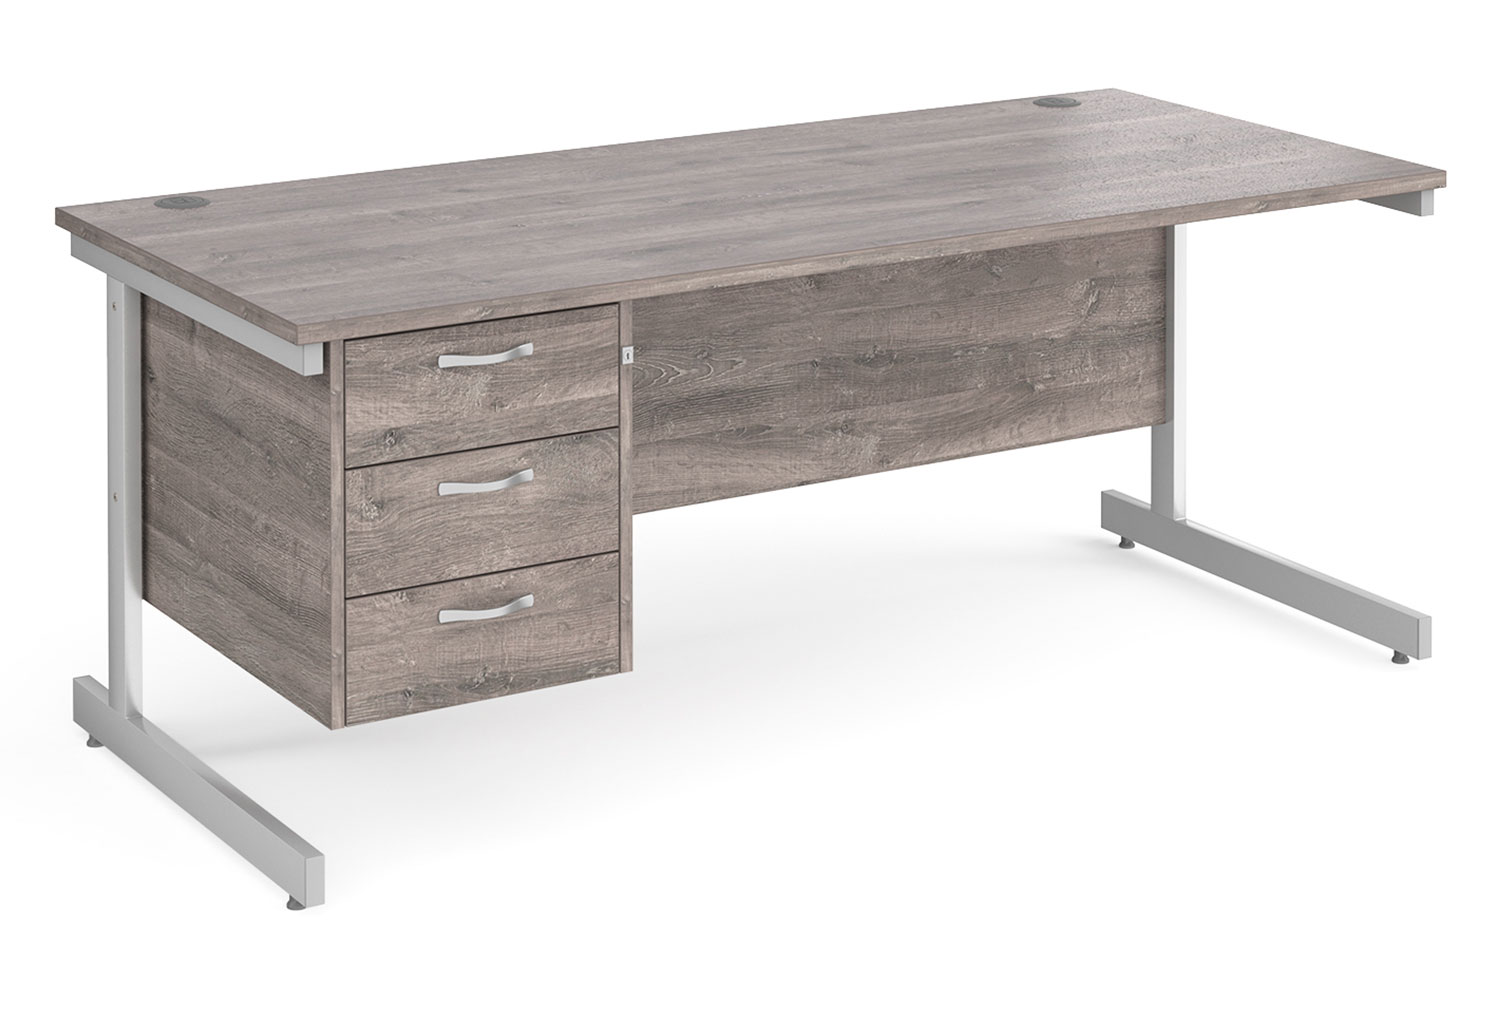 Tully I Rectangular Office Desk 3 Drawers, 180wx80dx73h (cm), Grey Oak, Express Delivery